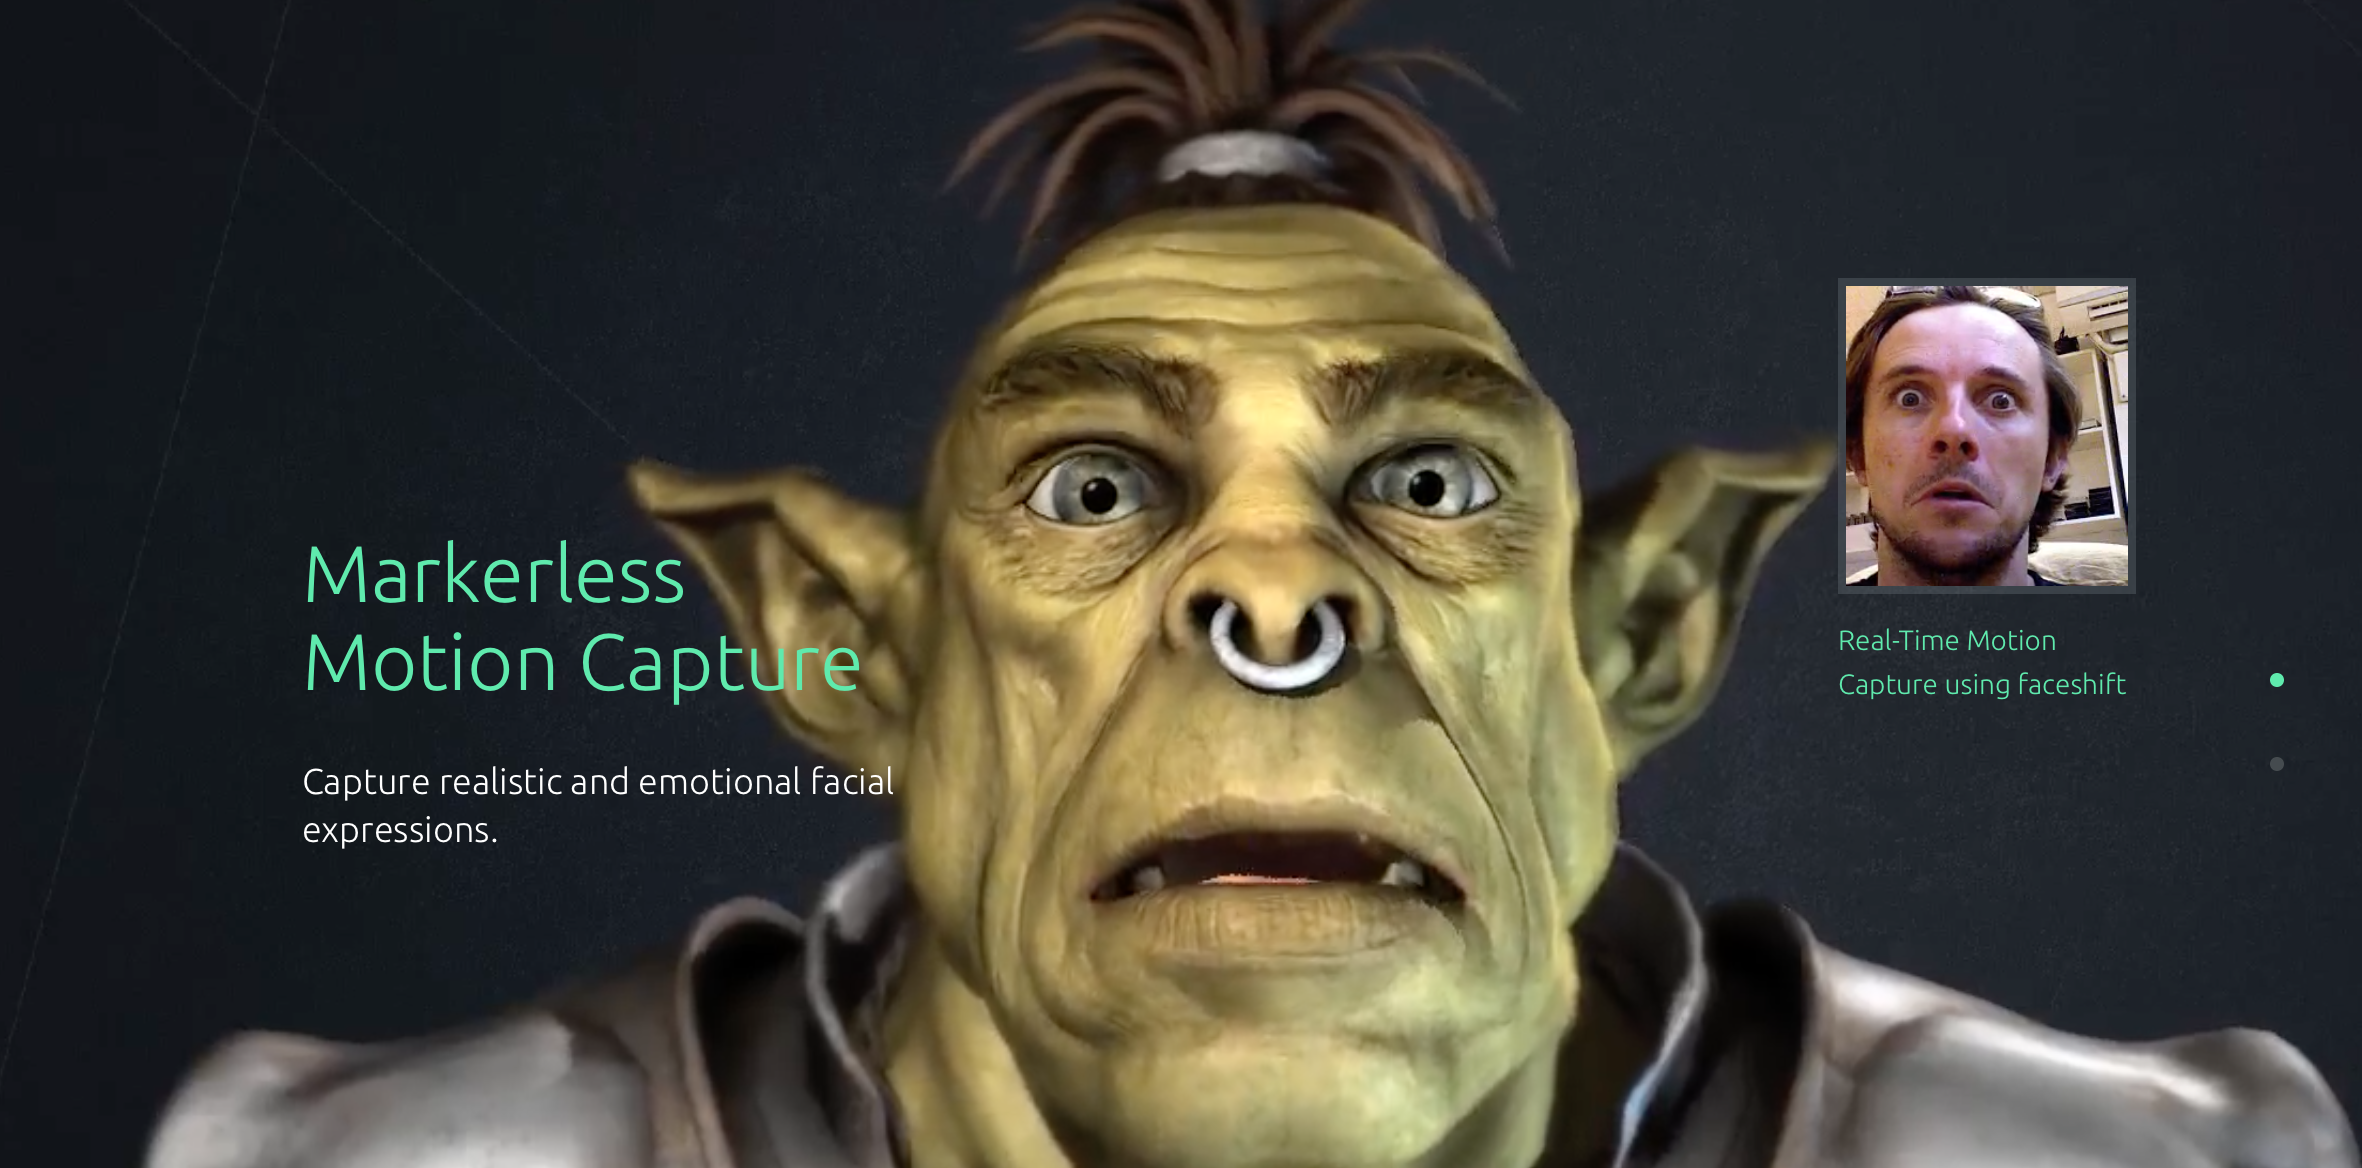 Apple reportedly purchased facial motion-capture company FaceShift - 9to5Mac